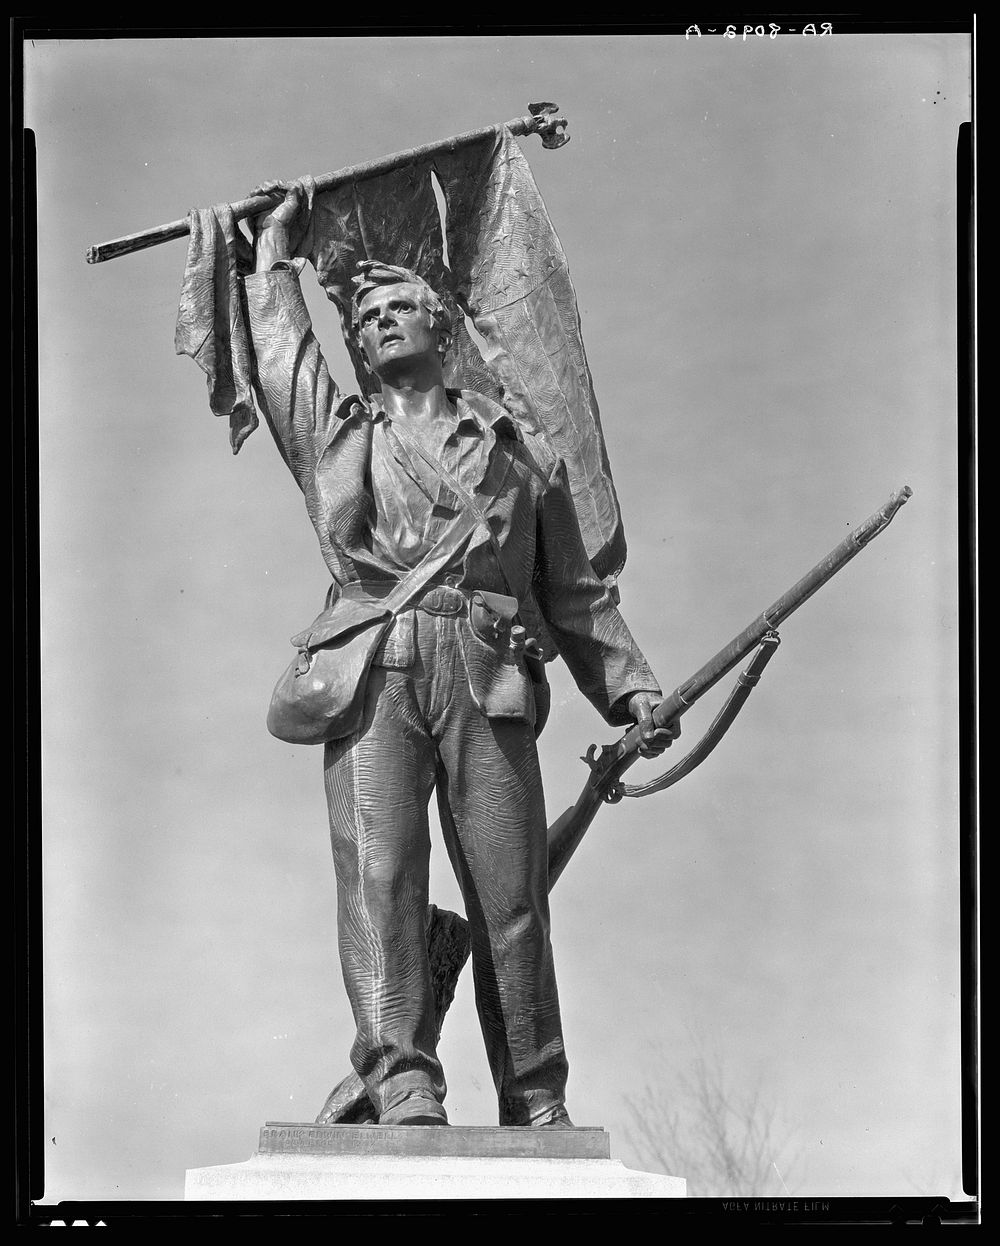 Civil War monument. Vicksburg, Mississippi. Sourced from the Library of Congress.